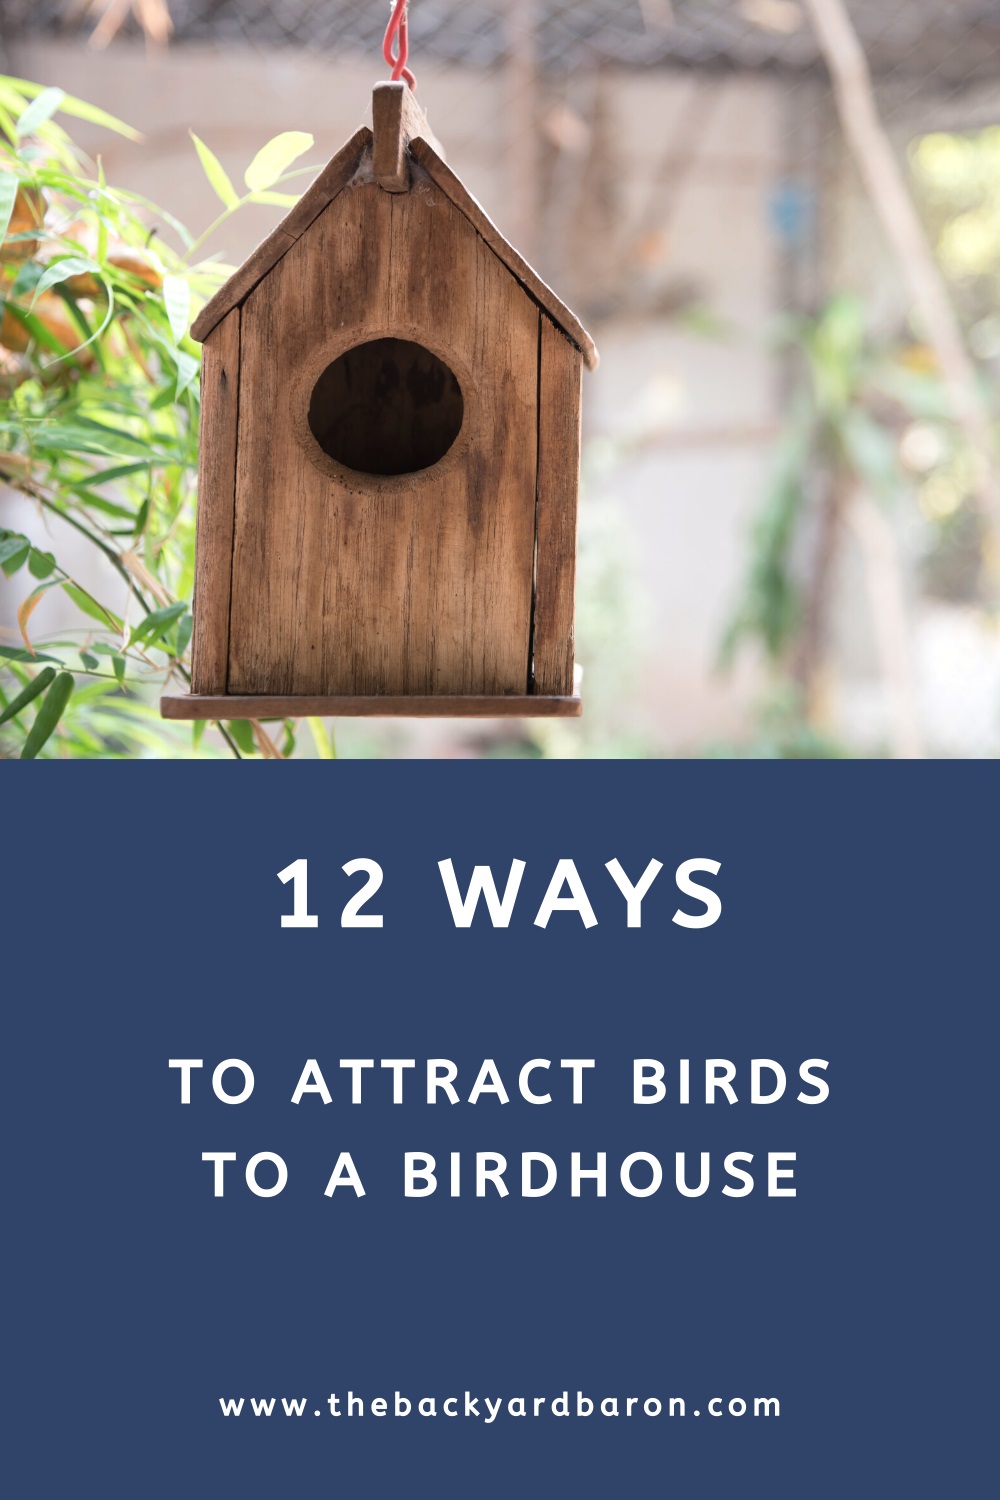 12 Ways to attract birds to a birdhouse